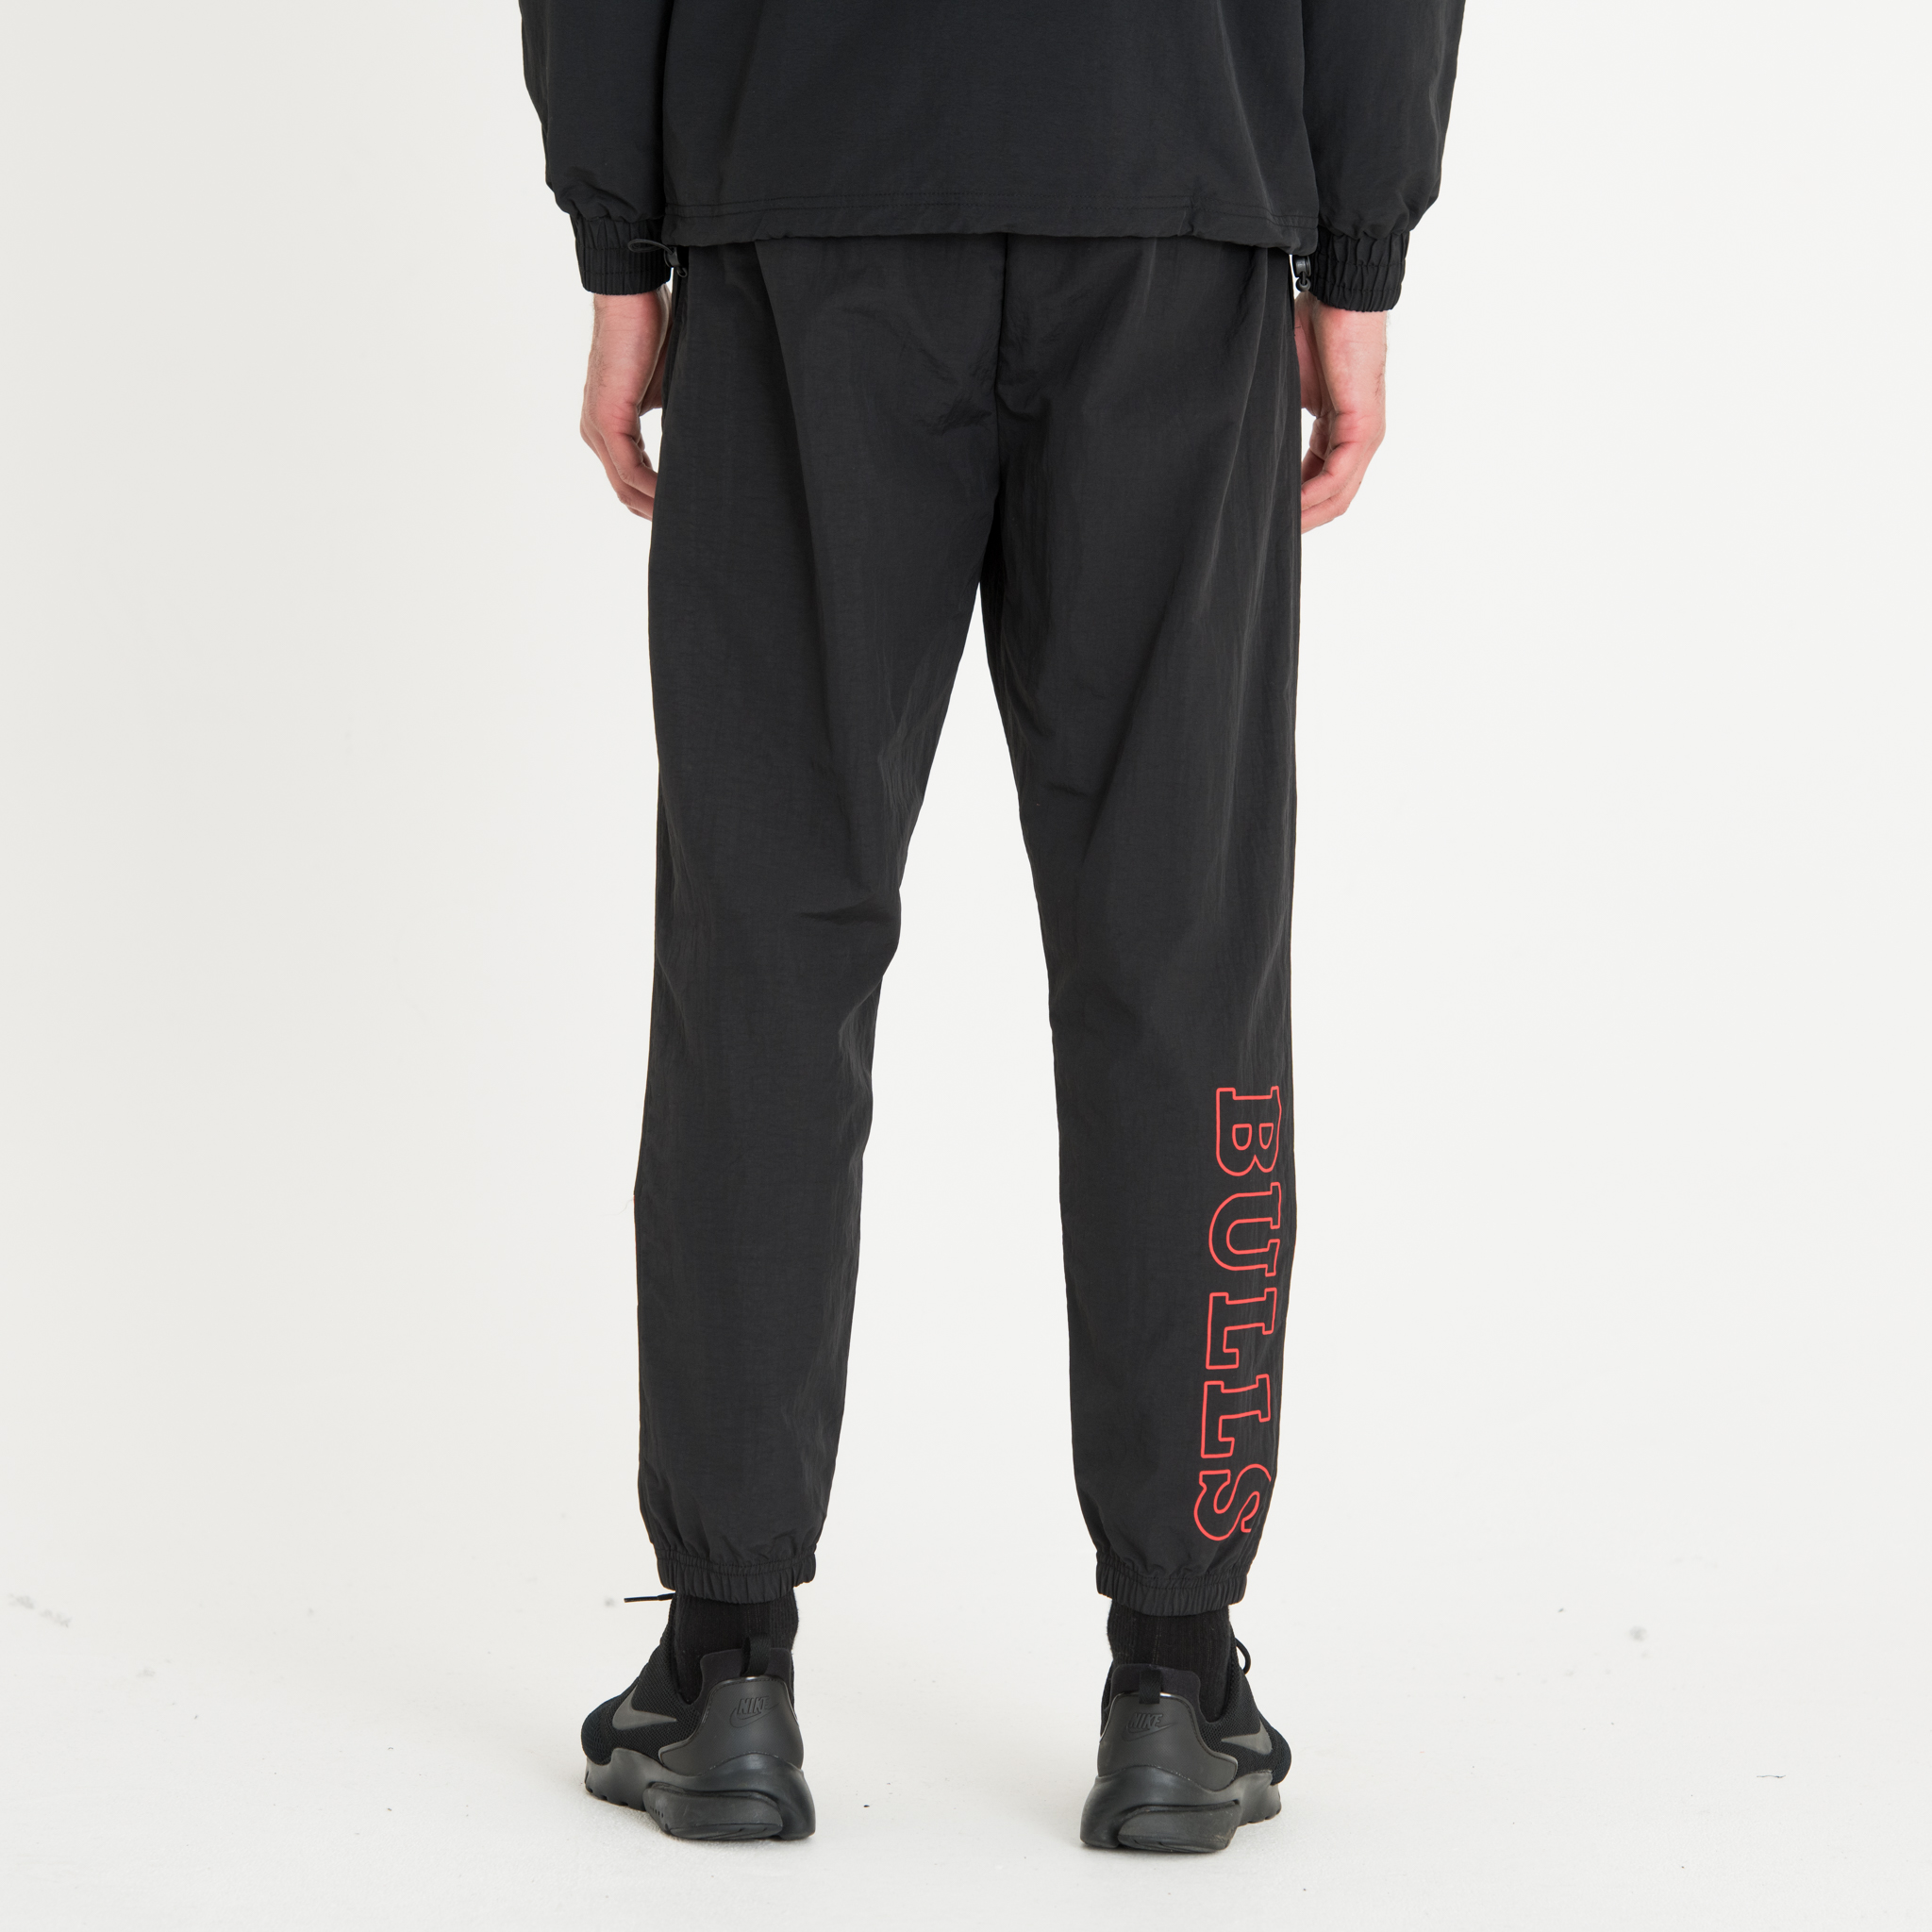 Chicago Bulls Red Track Pants